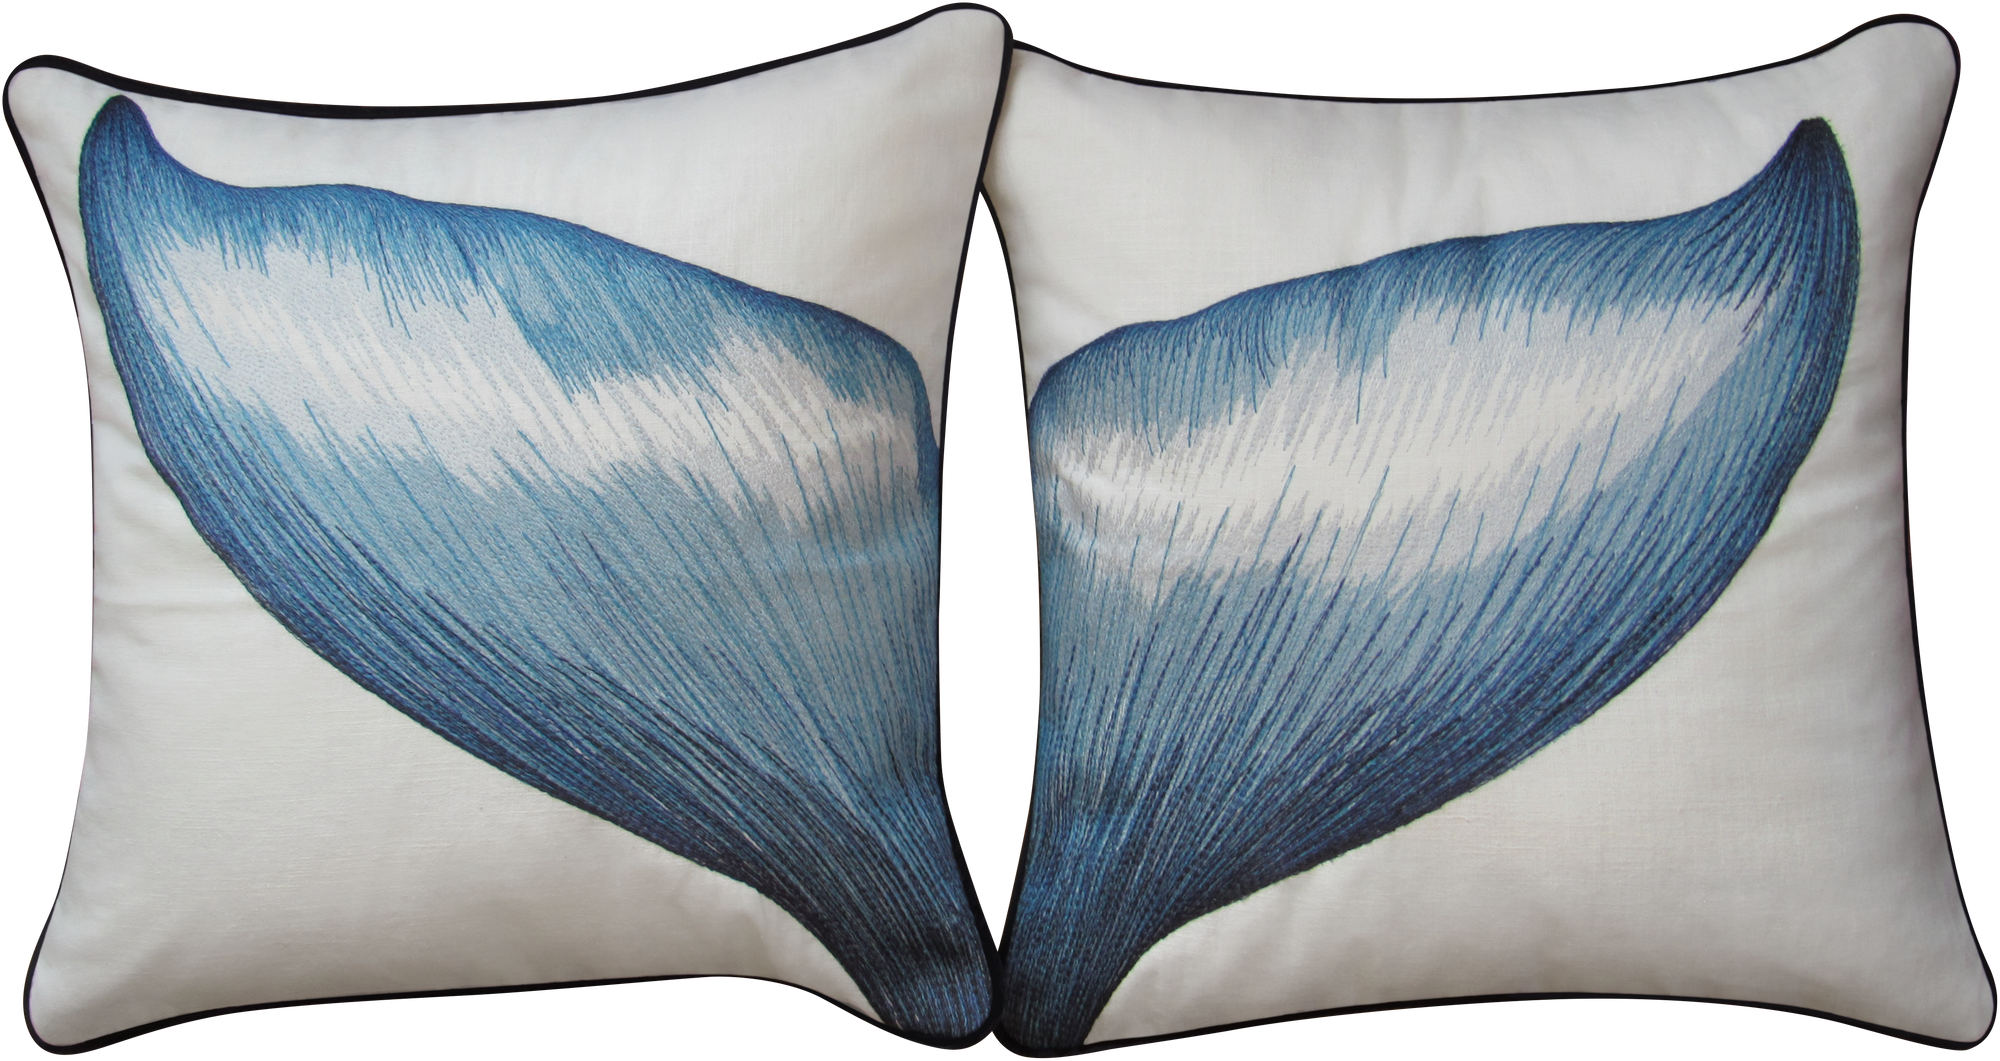 Whale Tail Embroidered Pillow Cover Set